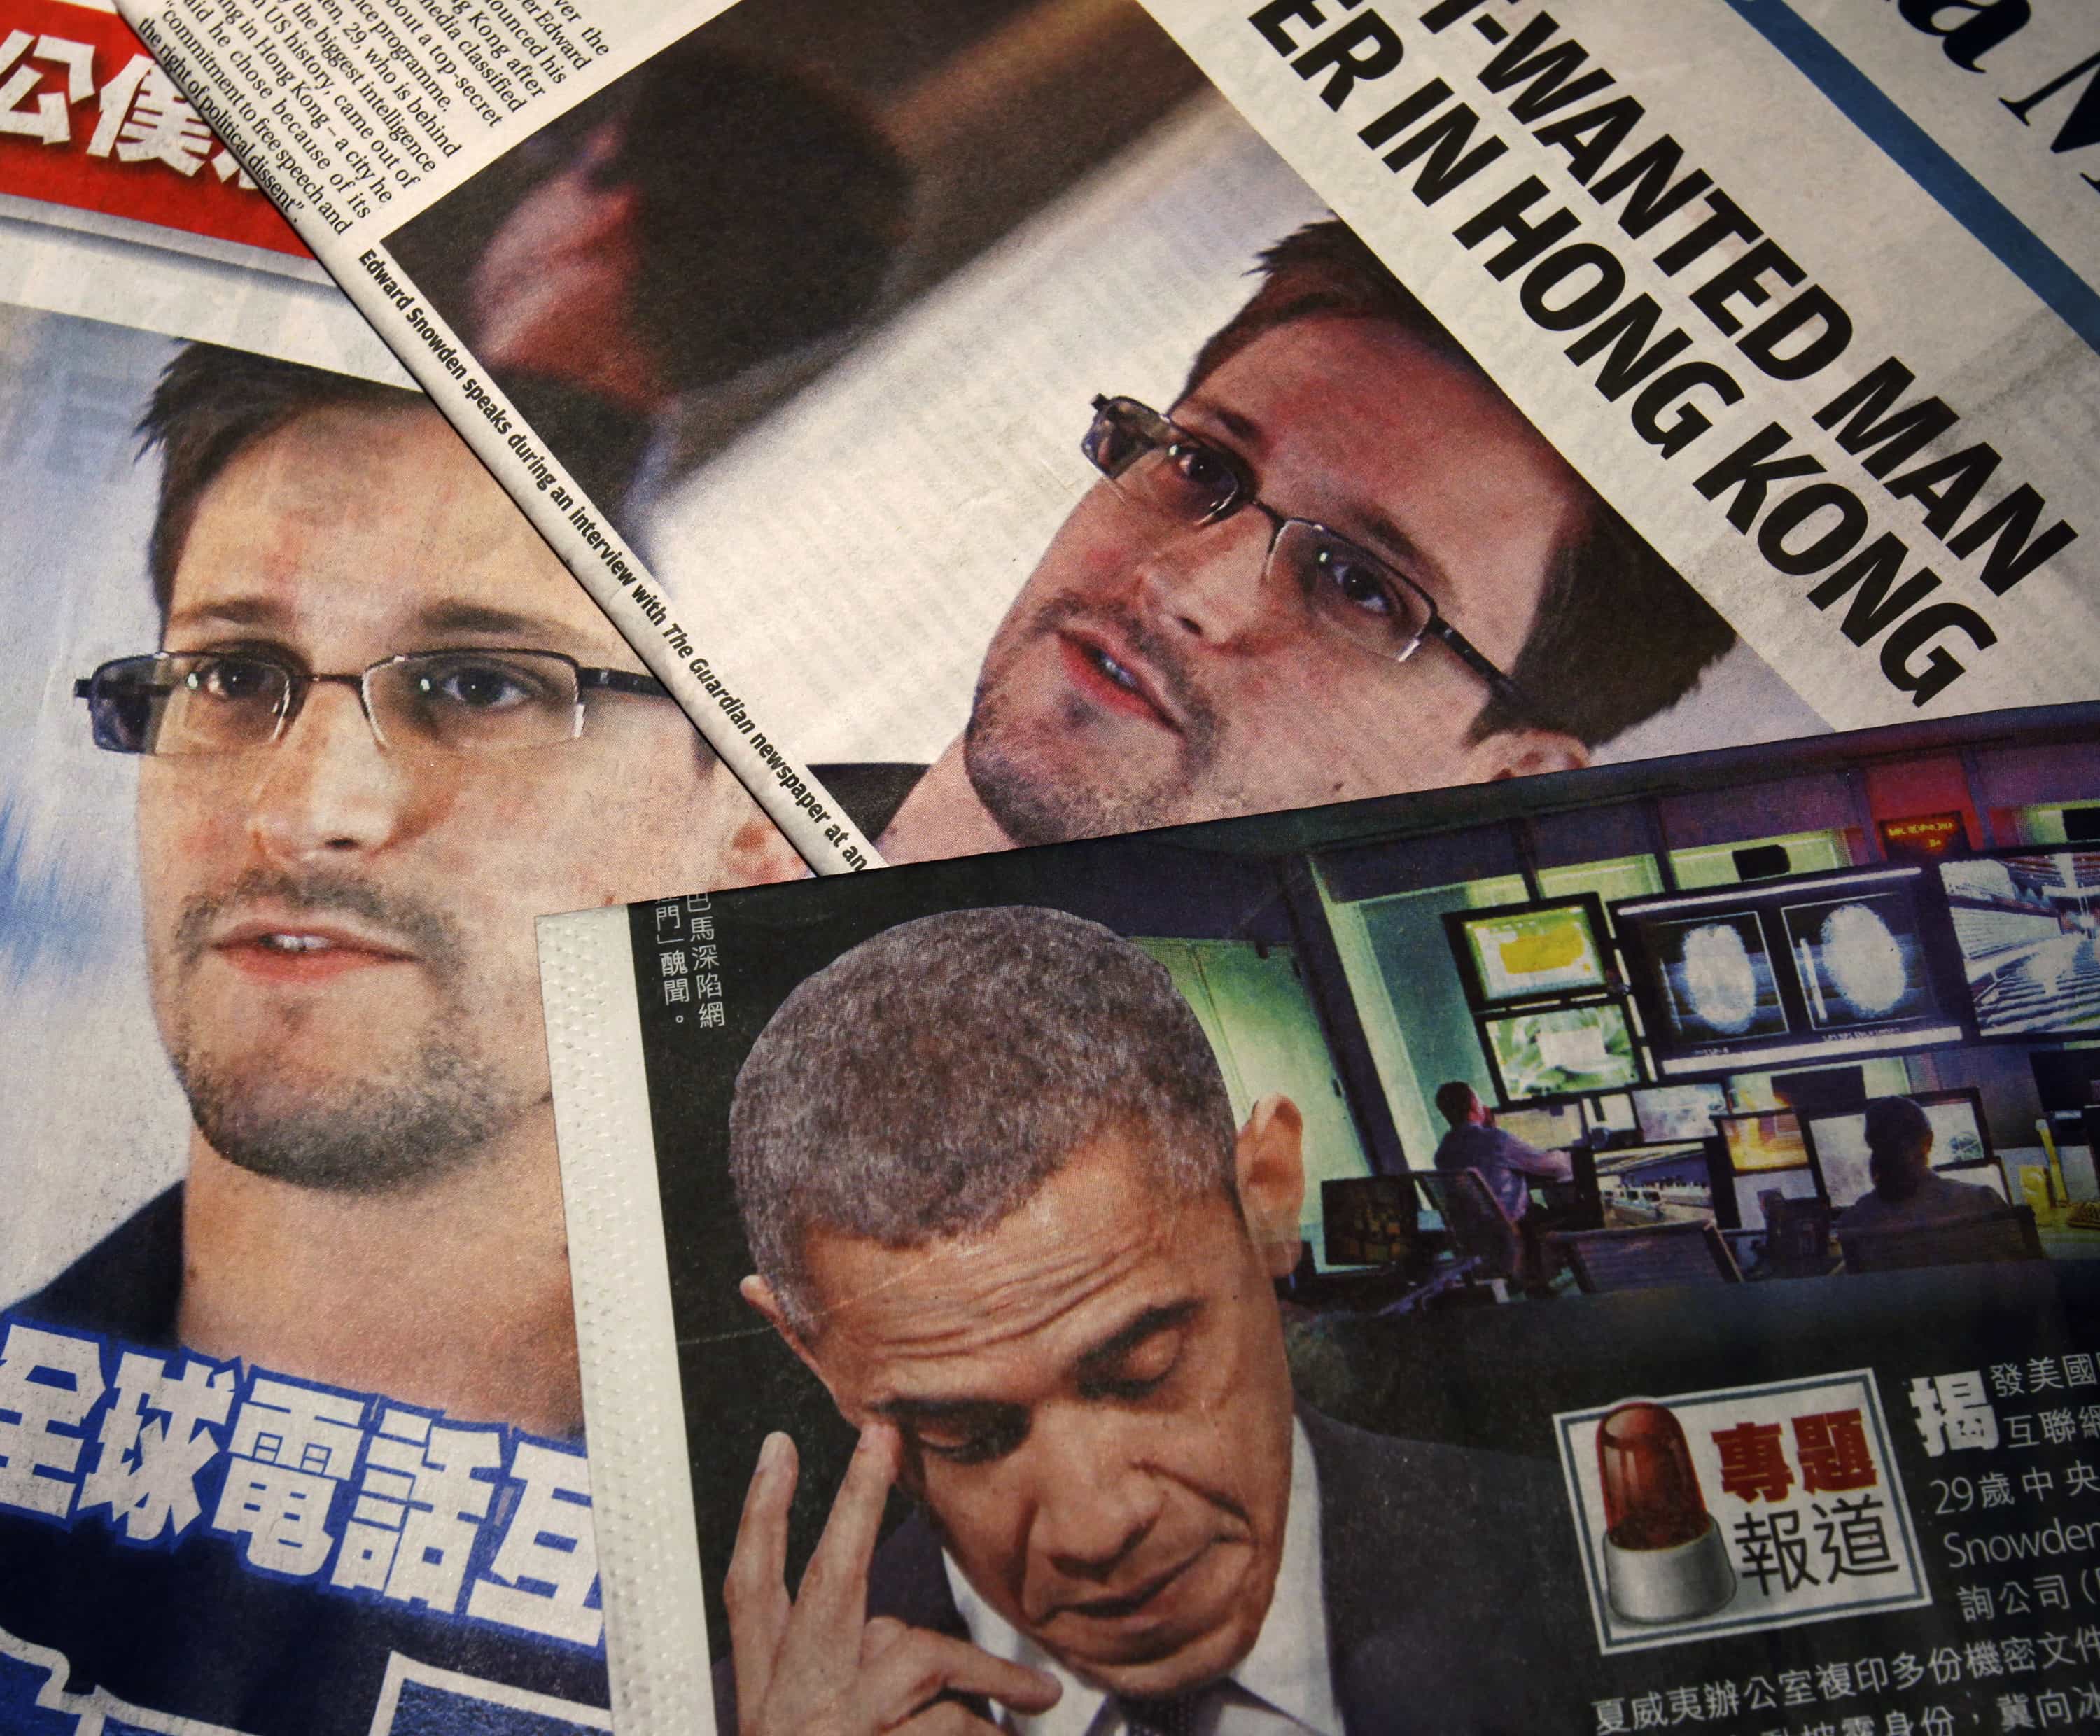 Photos of Edward Snowden and U.S. President Barack Obama are printed on the front pages of local English and Chinese newspapers in Hong Kong, 11 June 2013, REUTERS/Bobby Yip